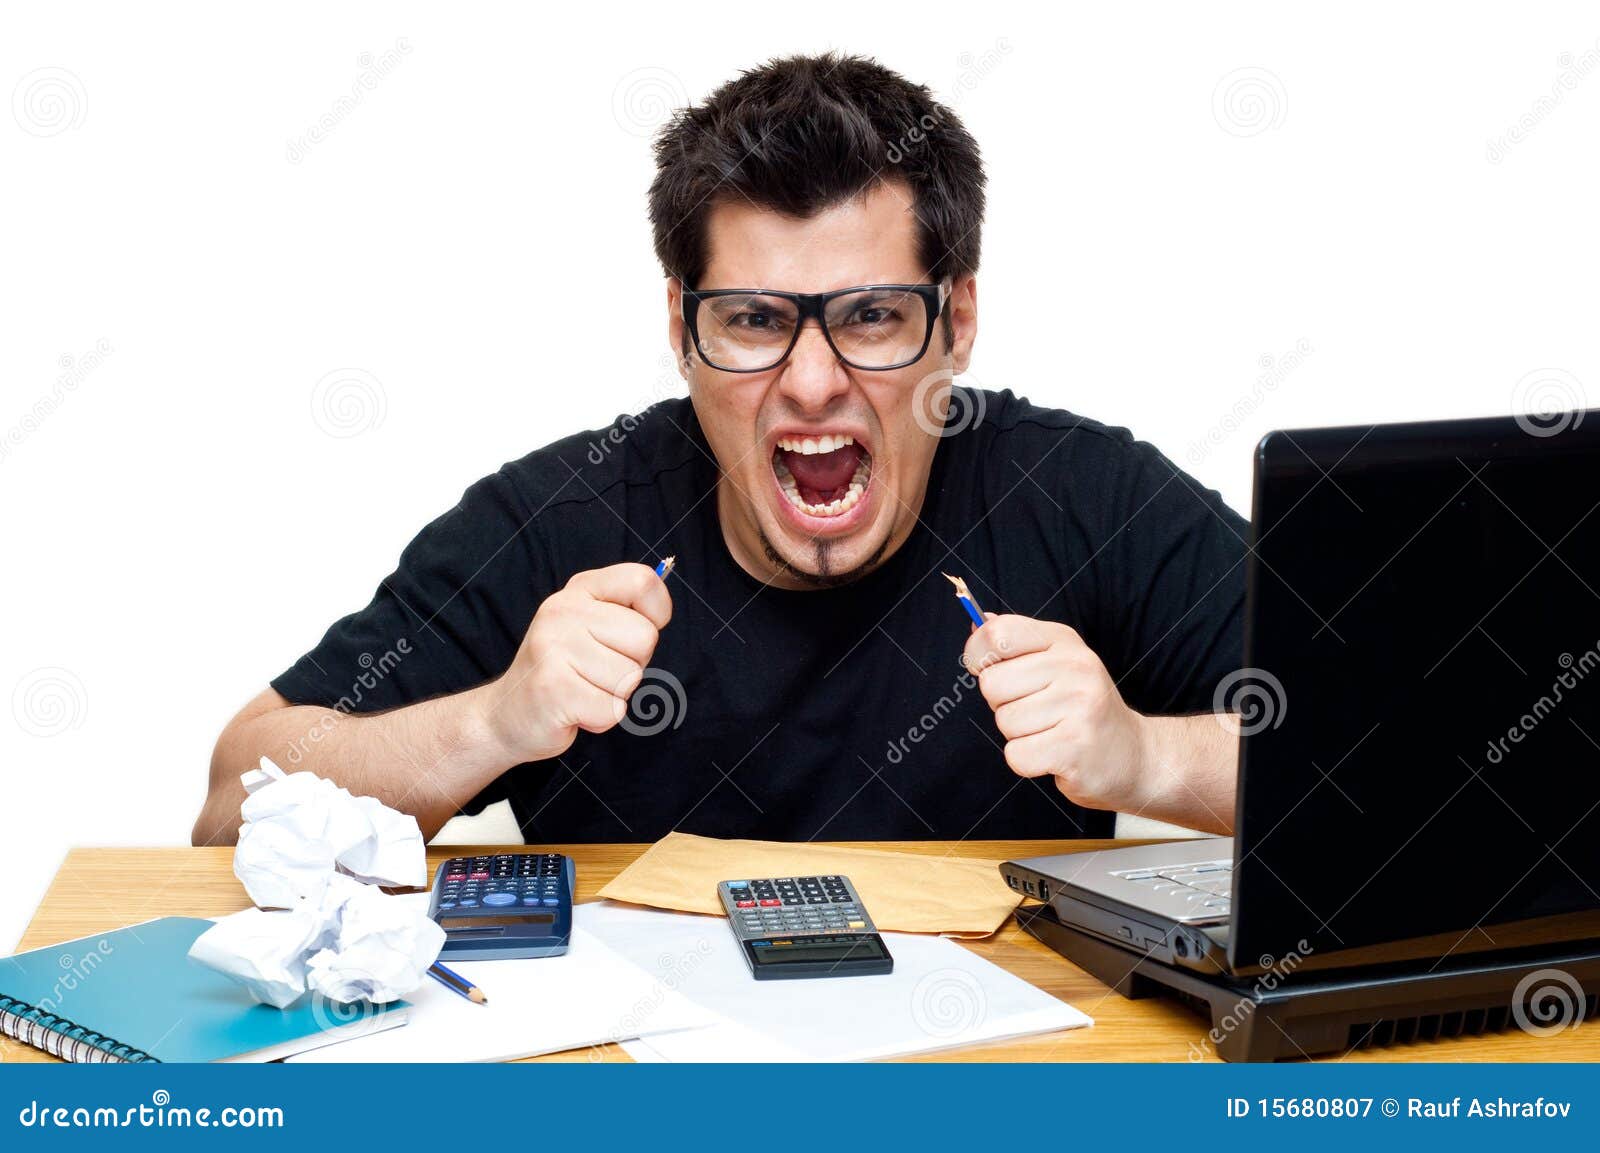 frustrated nerdy accountant